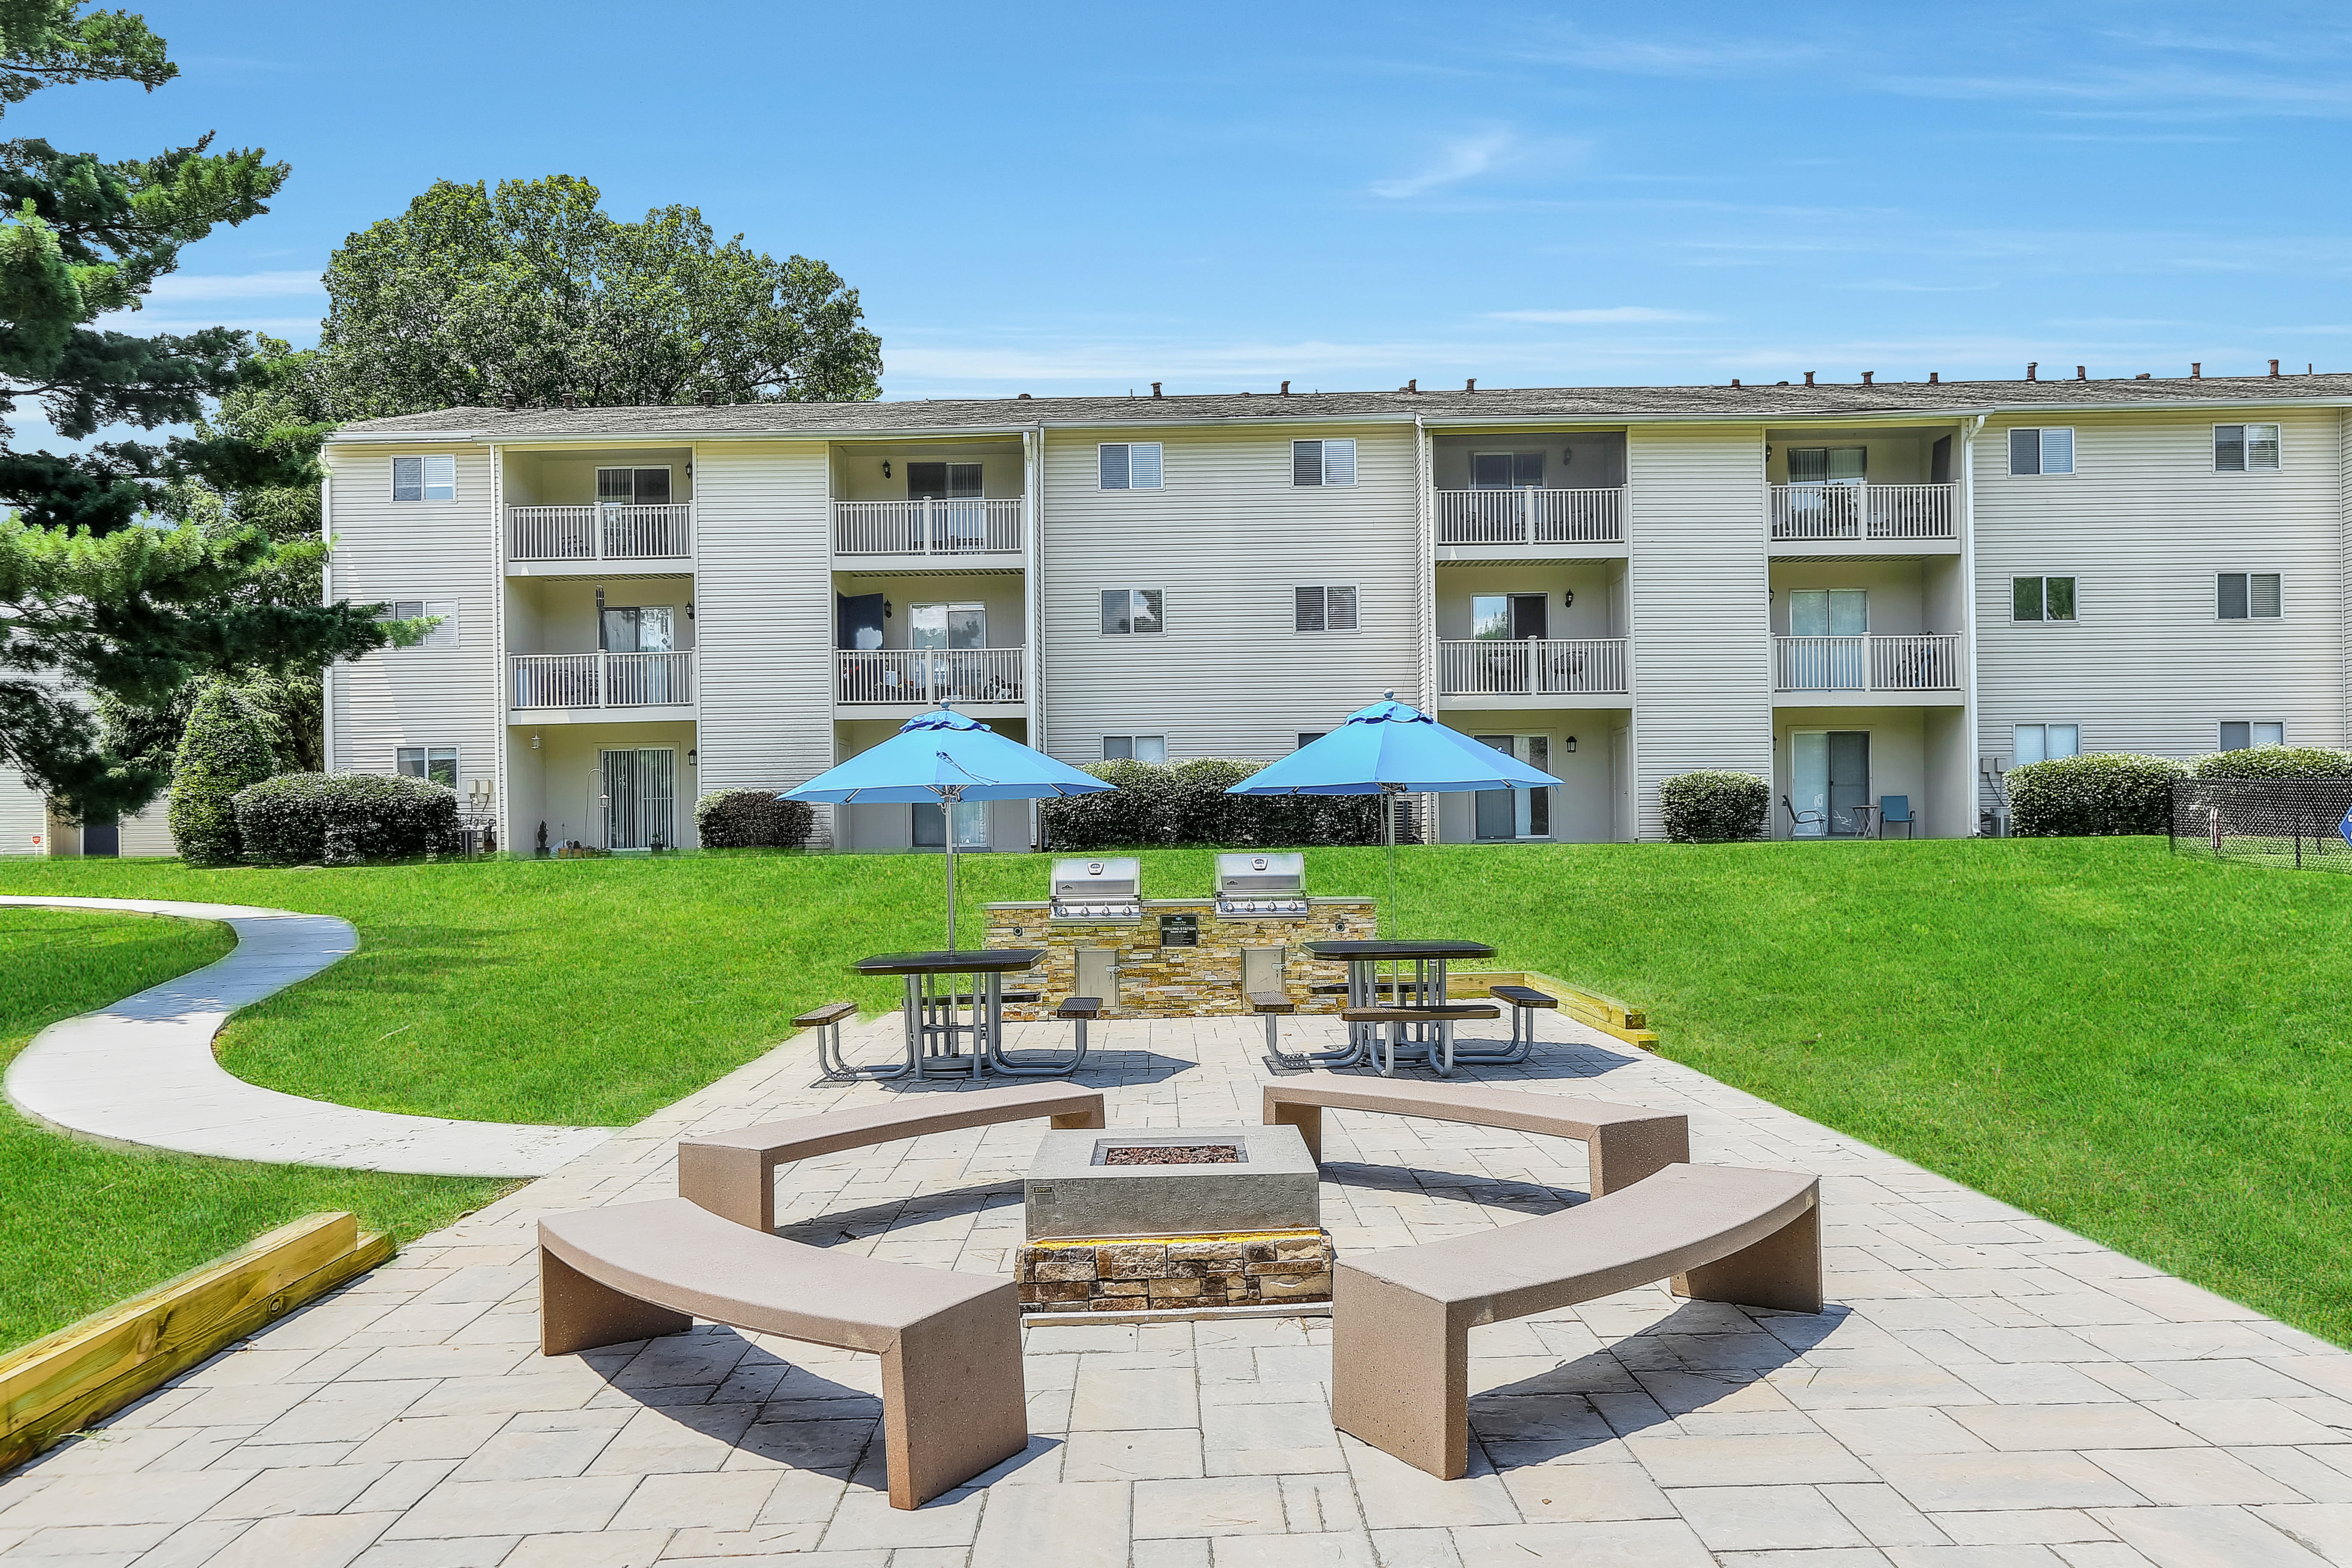 Firepit and patio with grilling stations at Lincoya Bay Apartments & Townhomes in Nashville, Tennessee